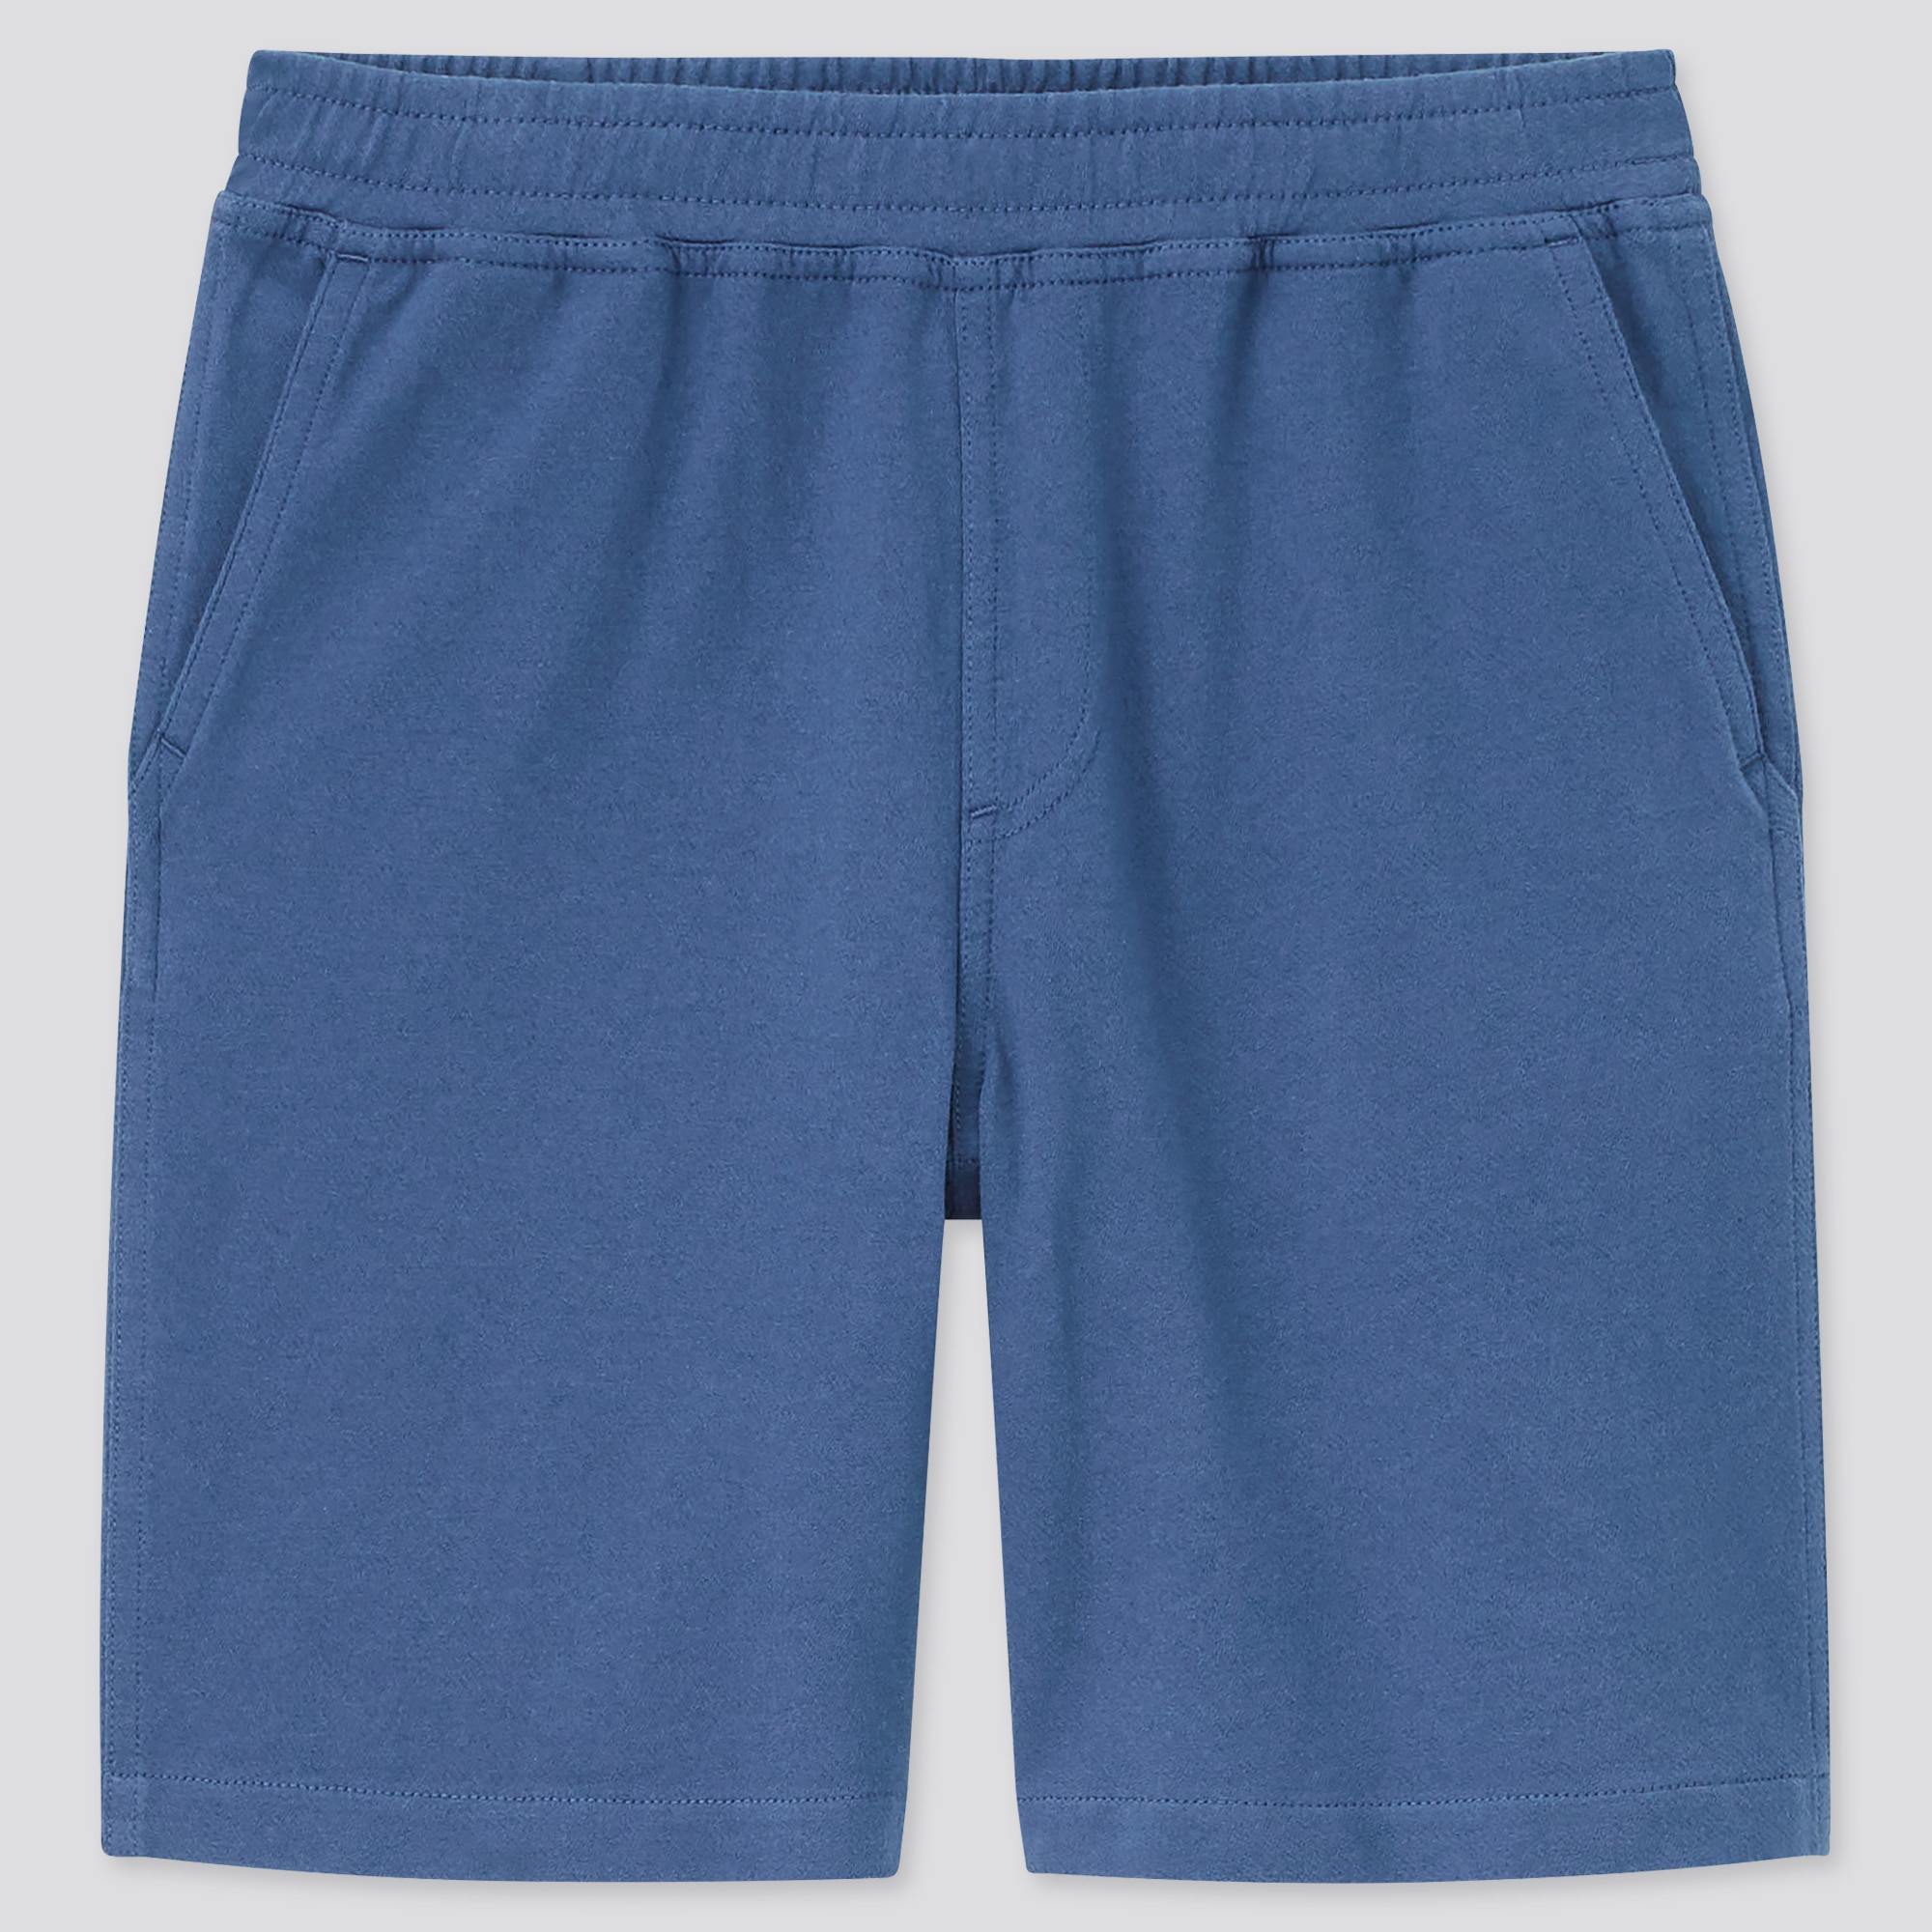 UNIQLO AIRism Cotton Easy Shorts | StyleHint